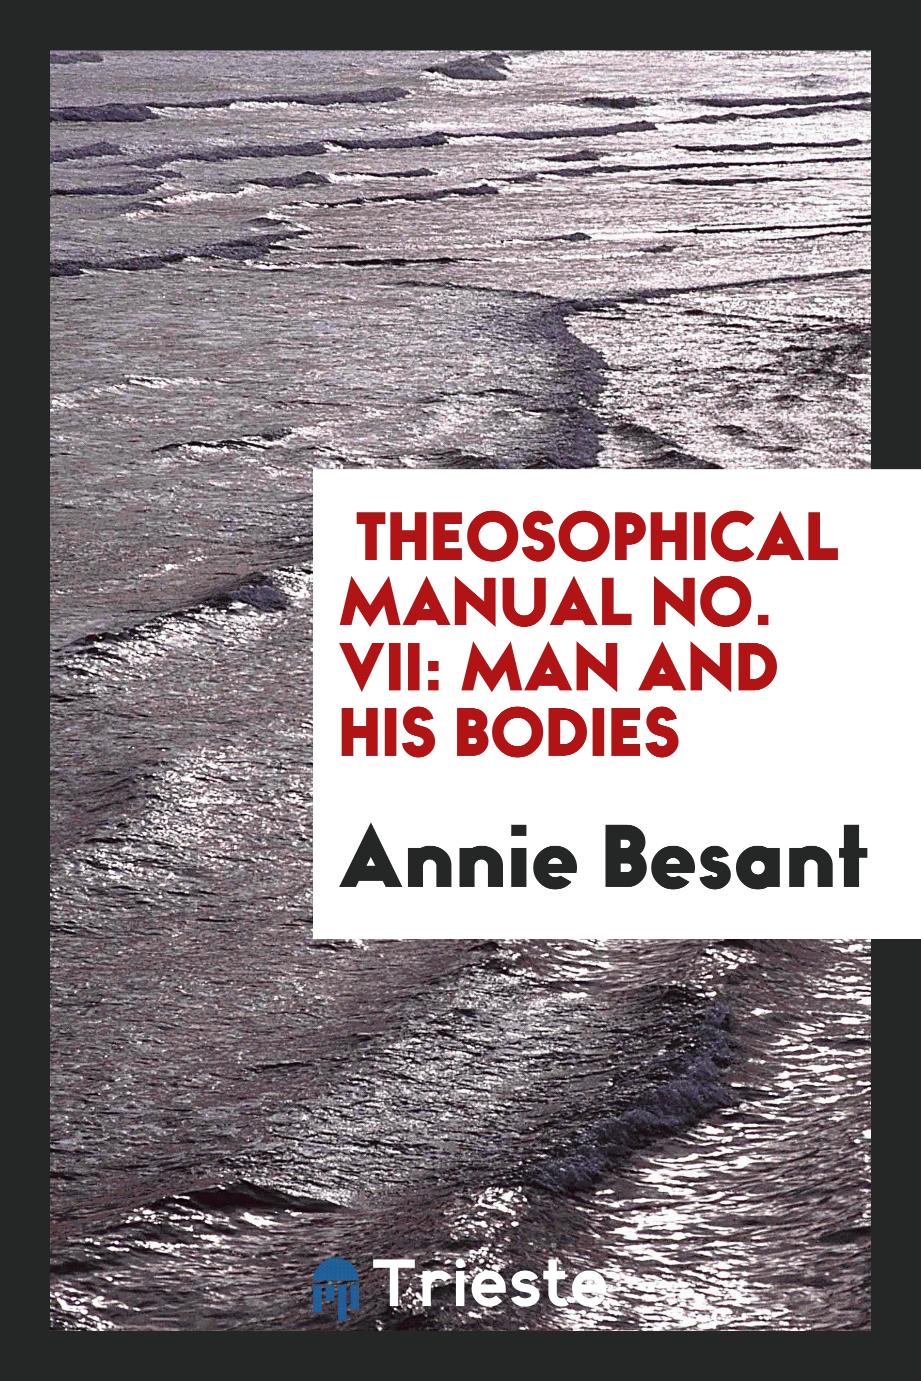 Annie Besant - Theosophical Manual No. VII: Man and His Bodies